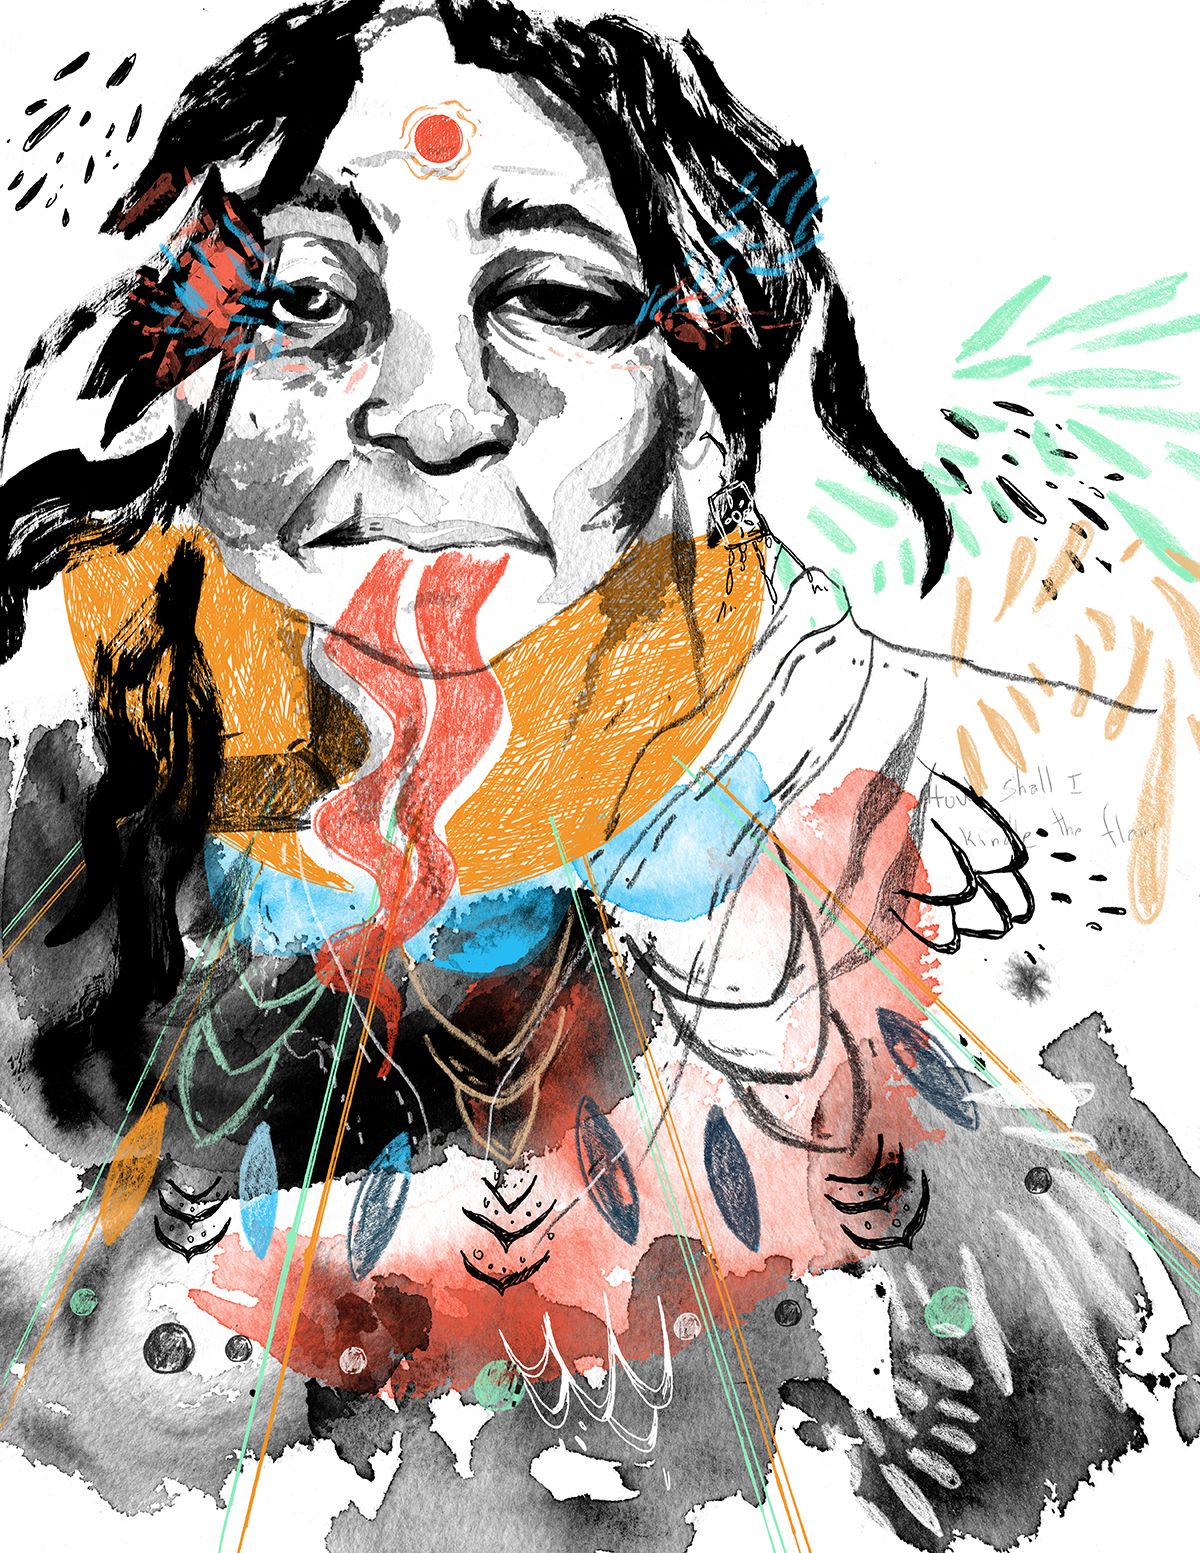 Mixed media painting of a native american with bold colorful strokes fanning out abstractly